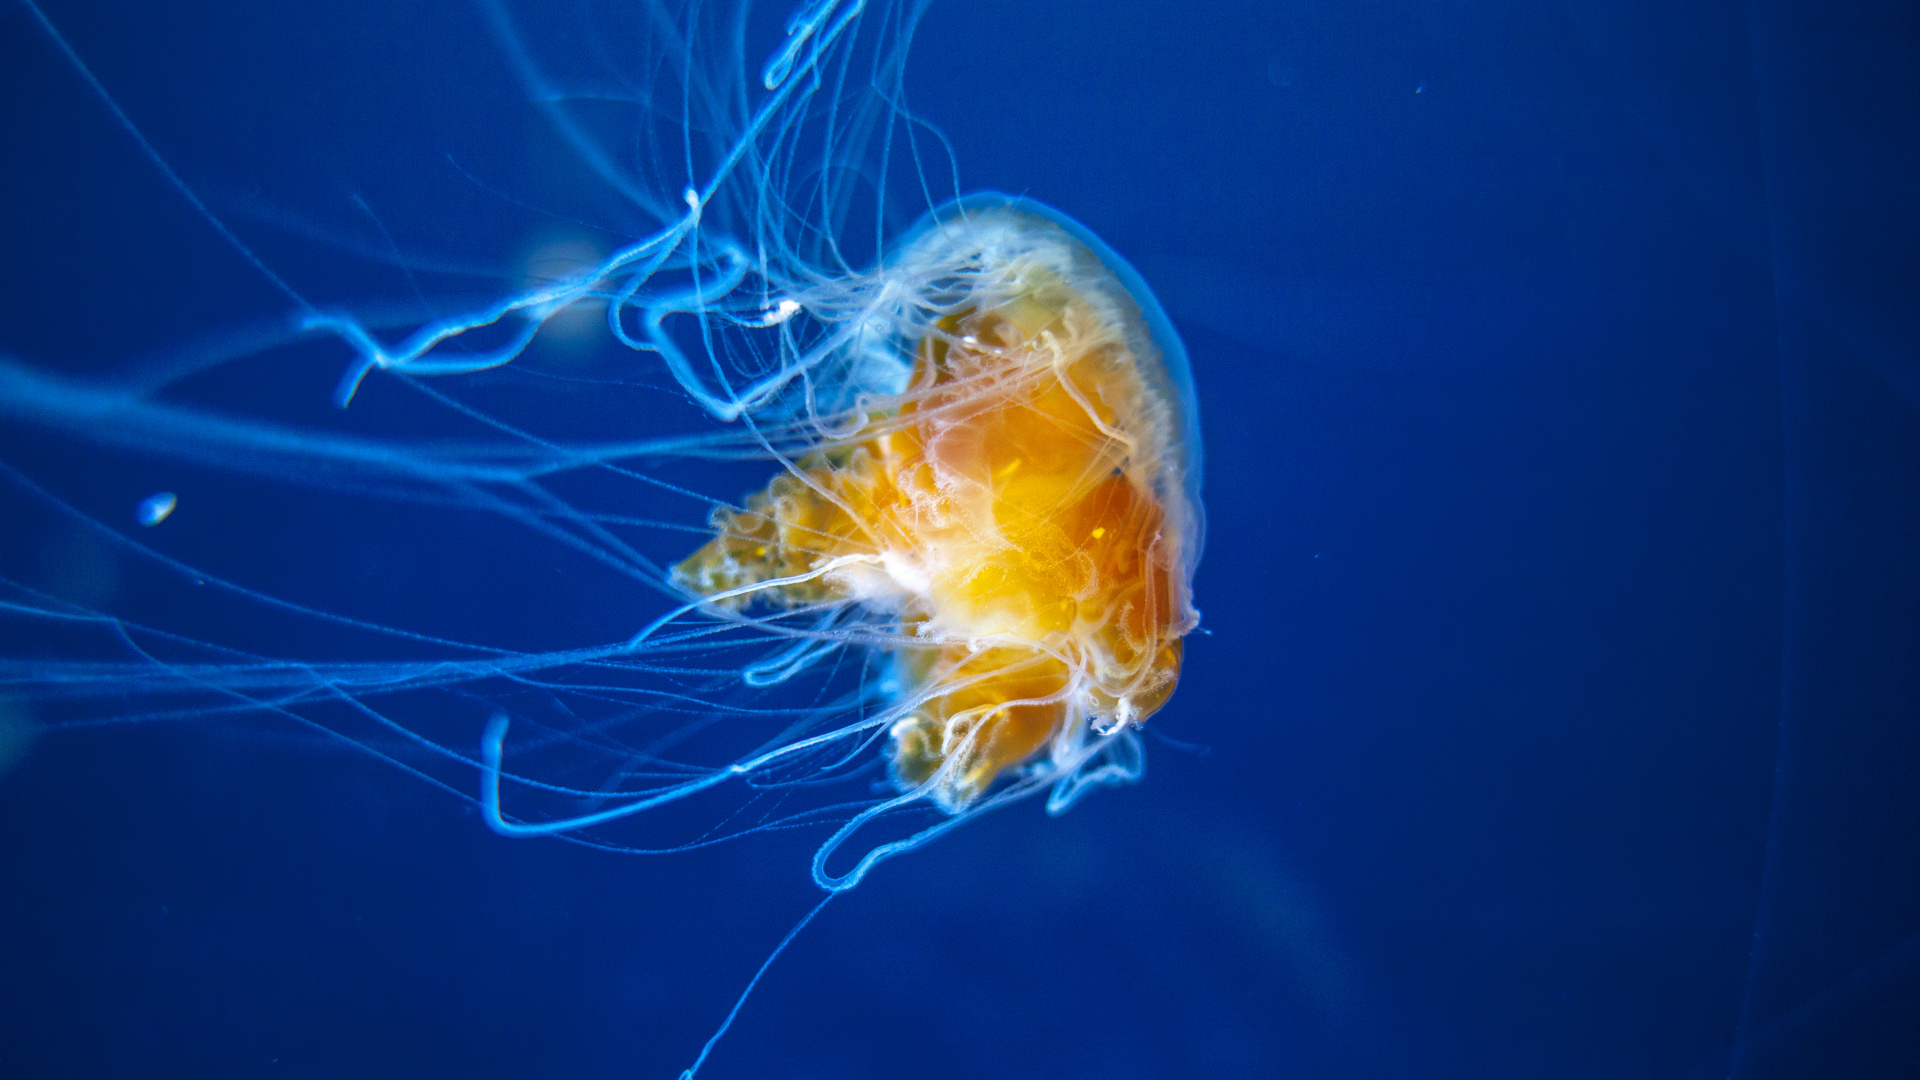 Yellow and White Jellyfish in Blue Water. Wallpaper in 1920x1080 Resolution